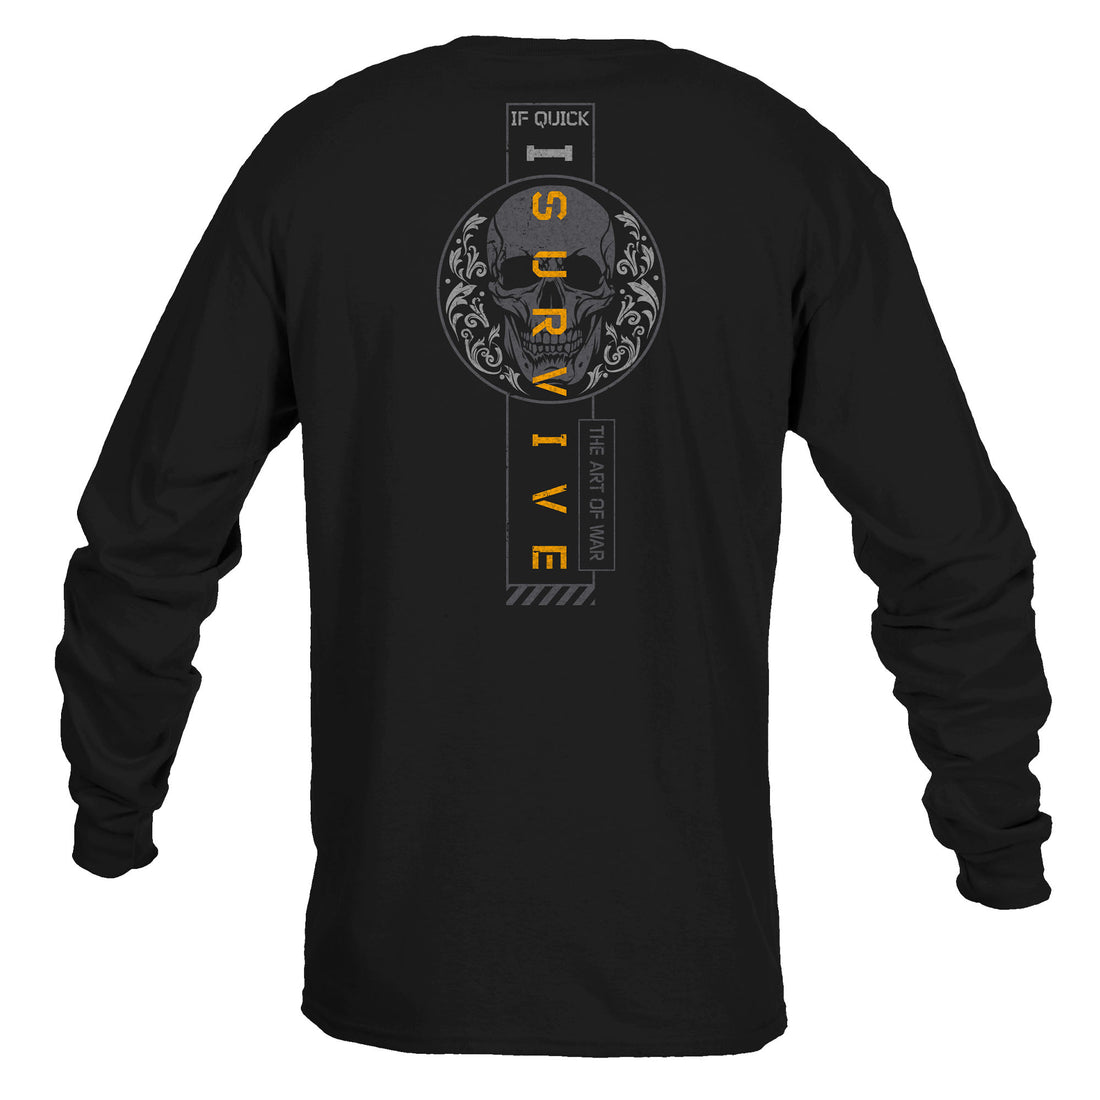 Long Sleeve Shirts for the Gym - I Survive Design 